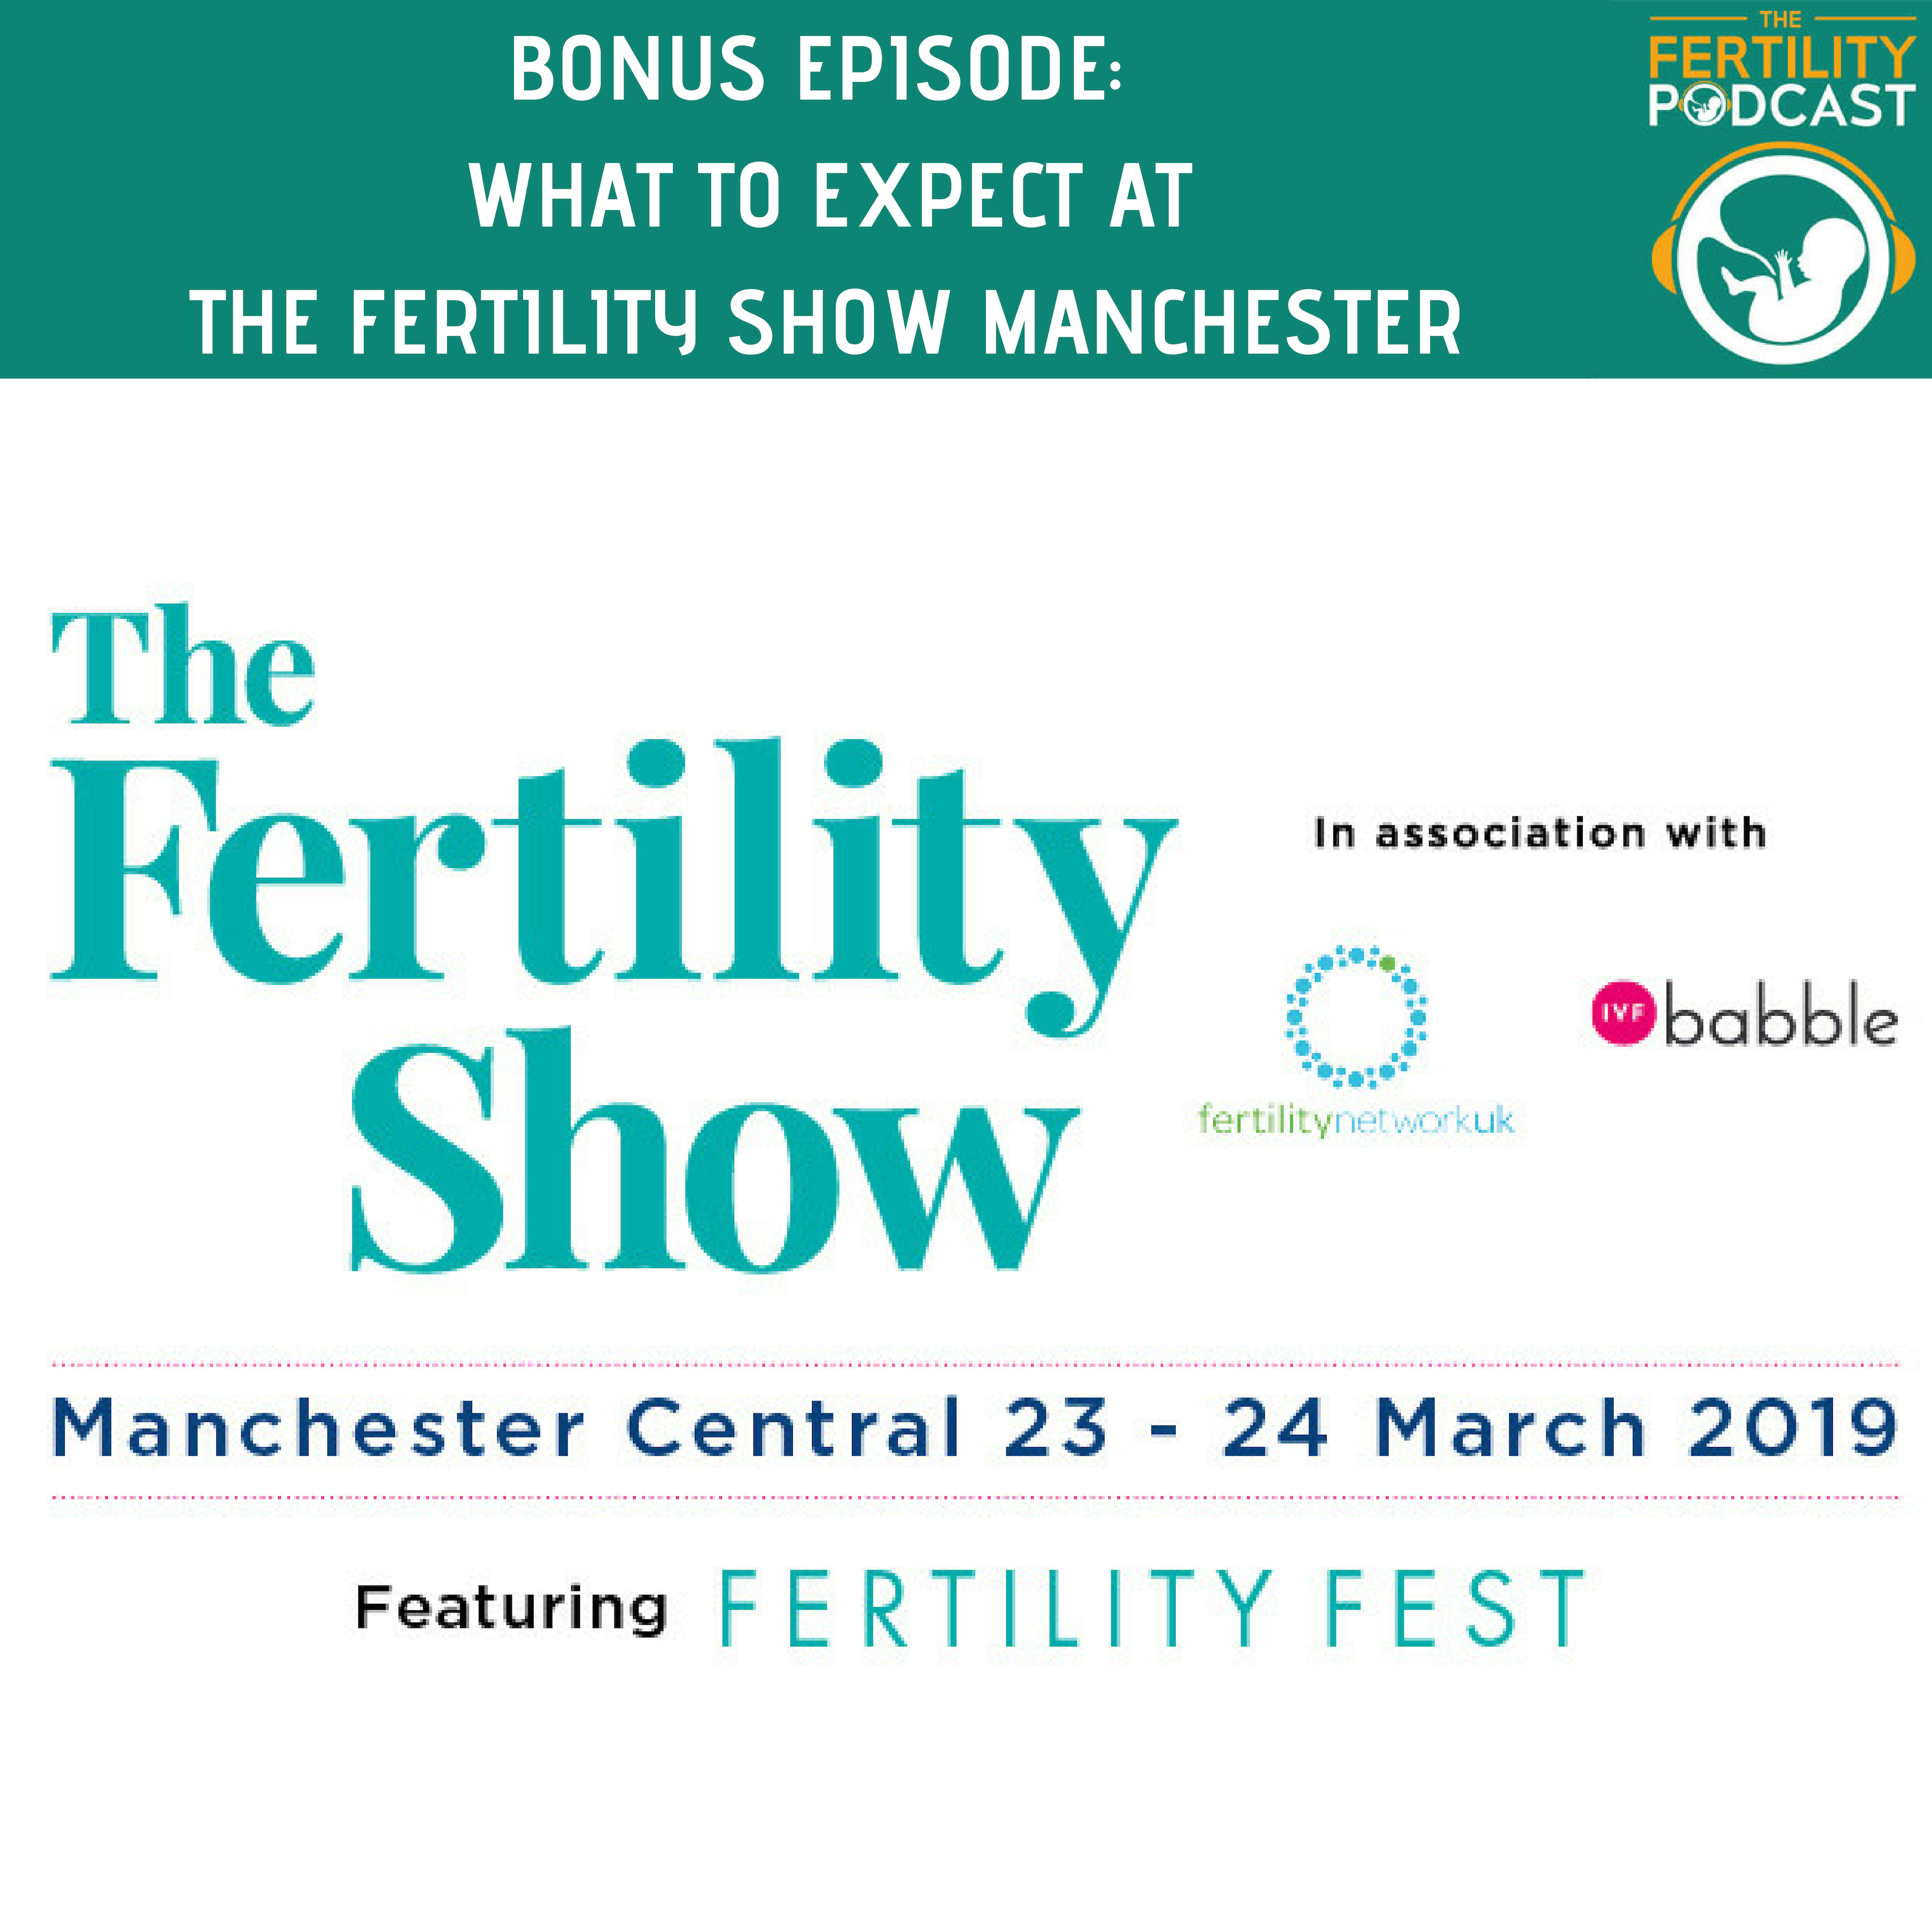 BONUS EPISODE: What to expect from The Fertility Show in Manchester